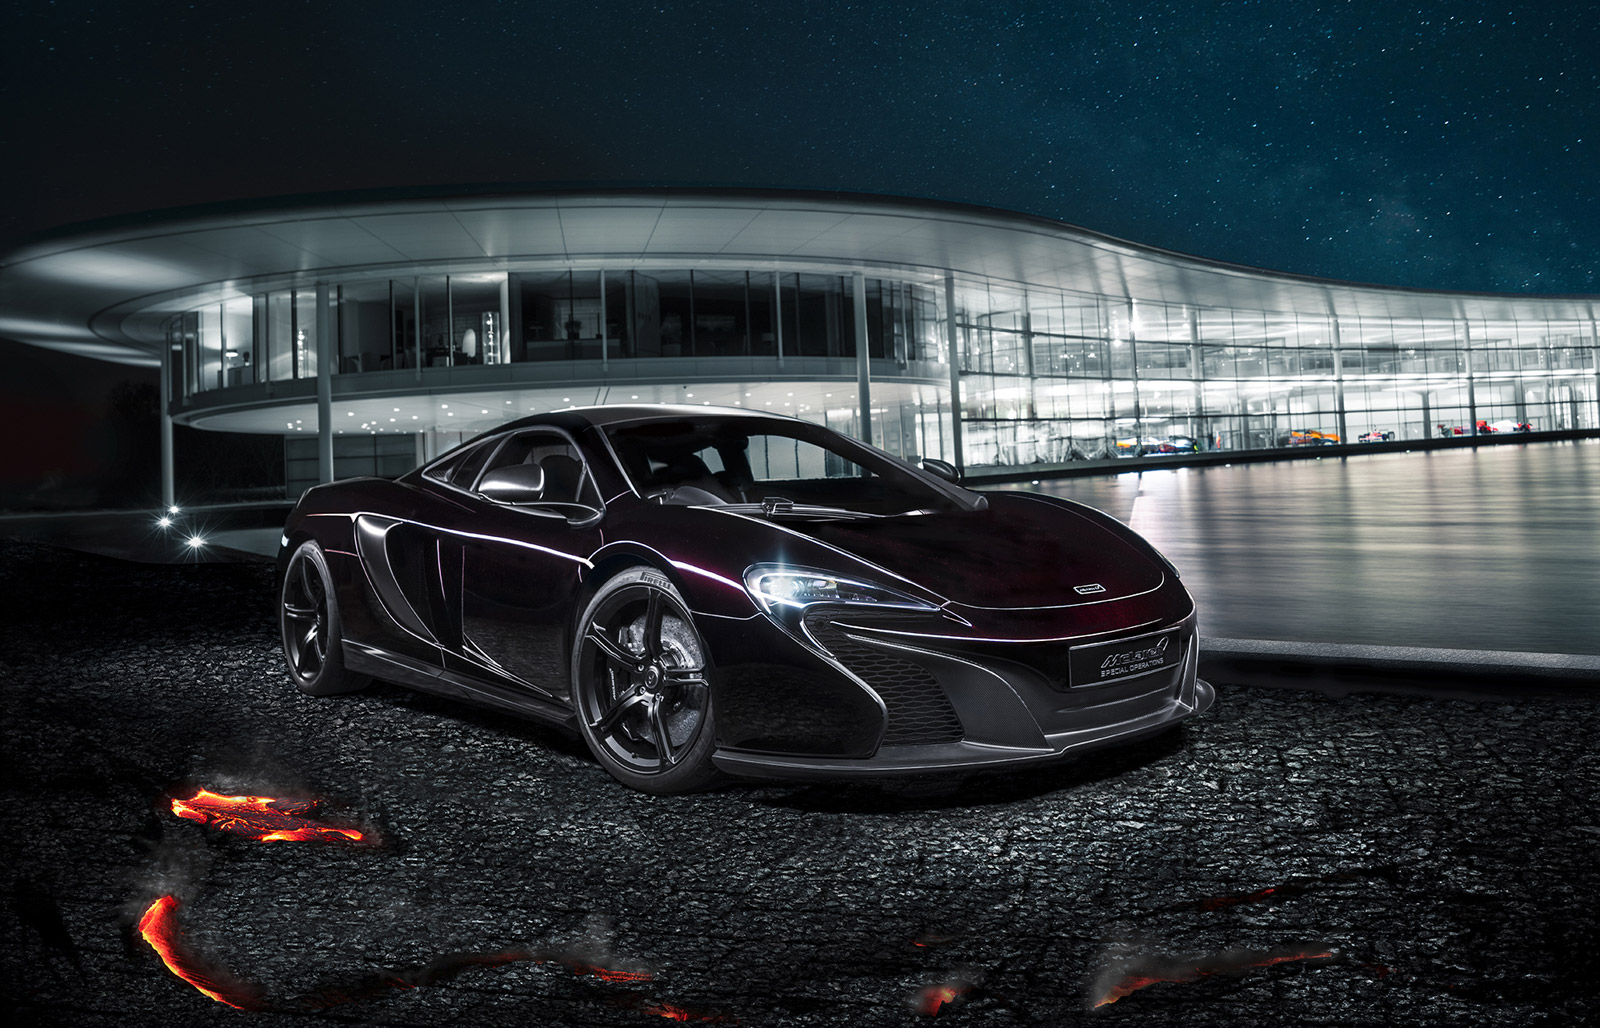 Mclaren Mso Personalization Department Develops New Parts For The 650s